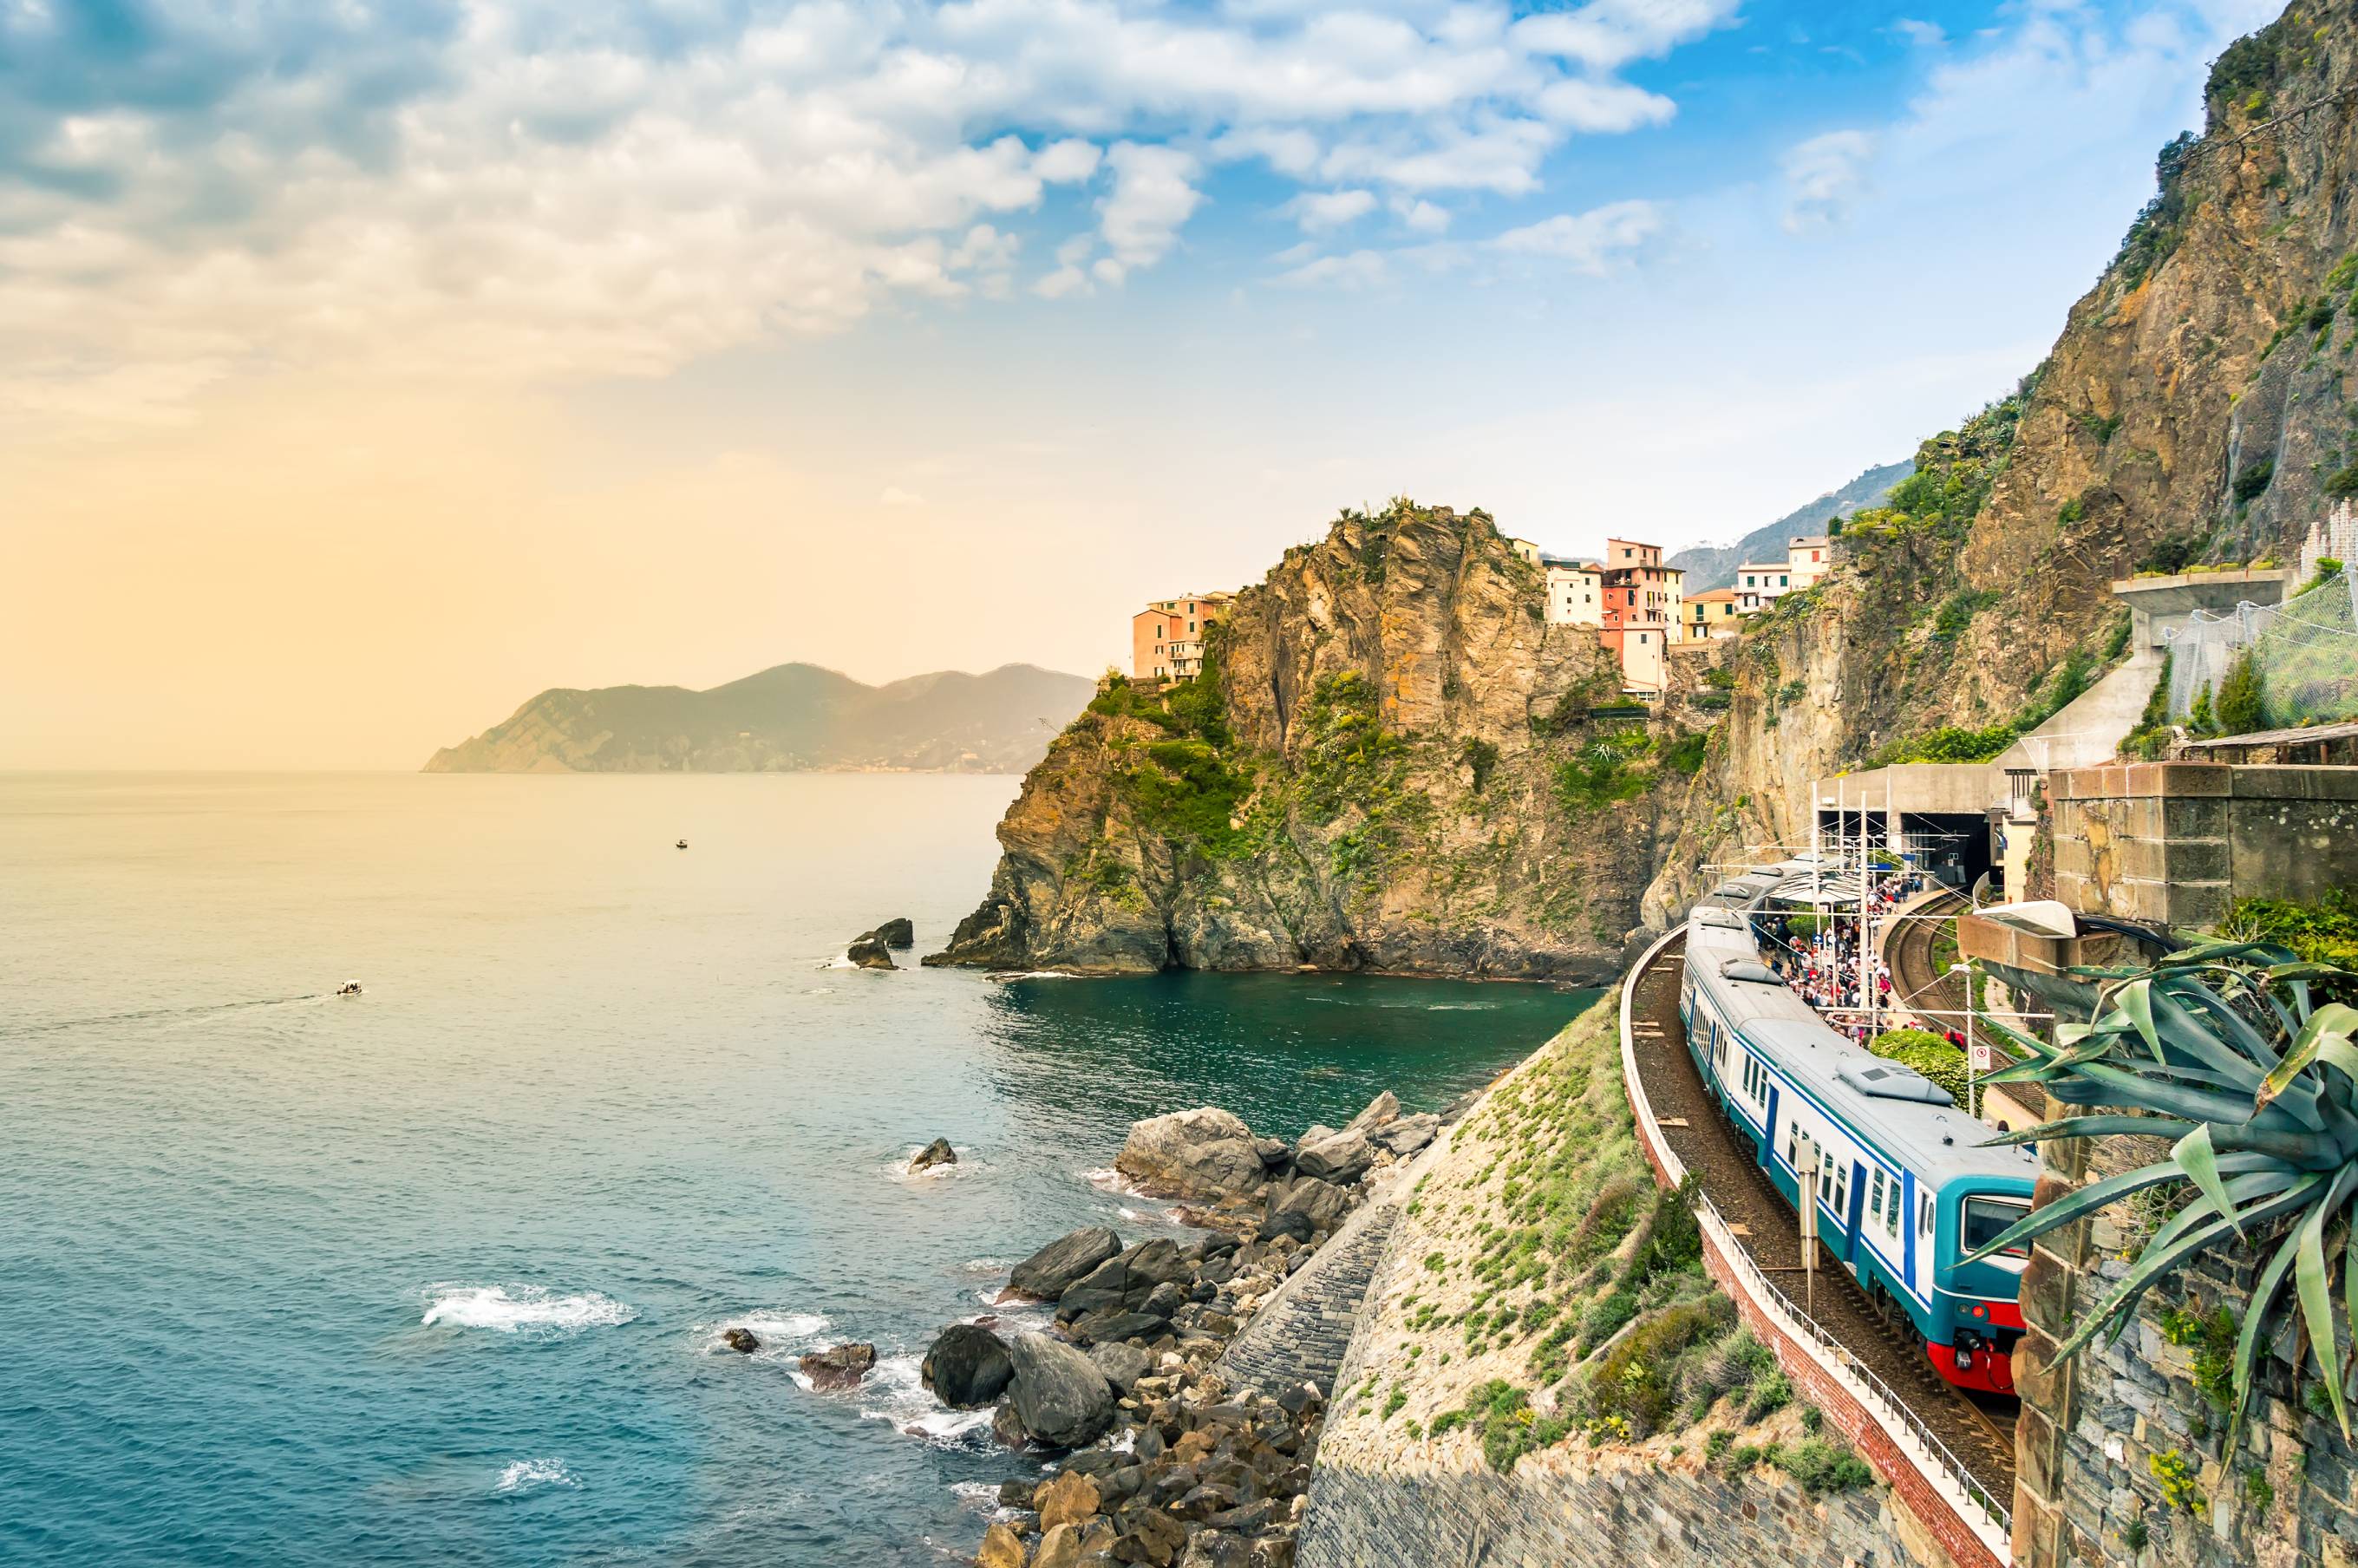 Manarola, Cinque Terre - train station in famous village with colorful houses on cliff over sea in Cinque Terre.